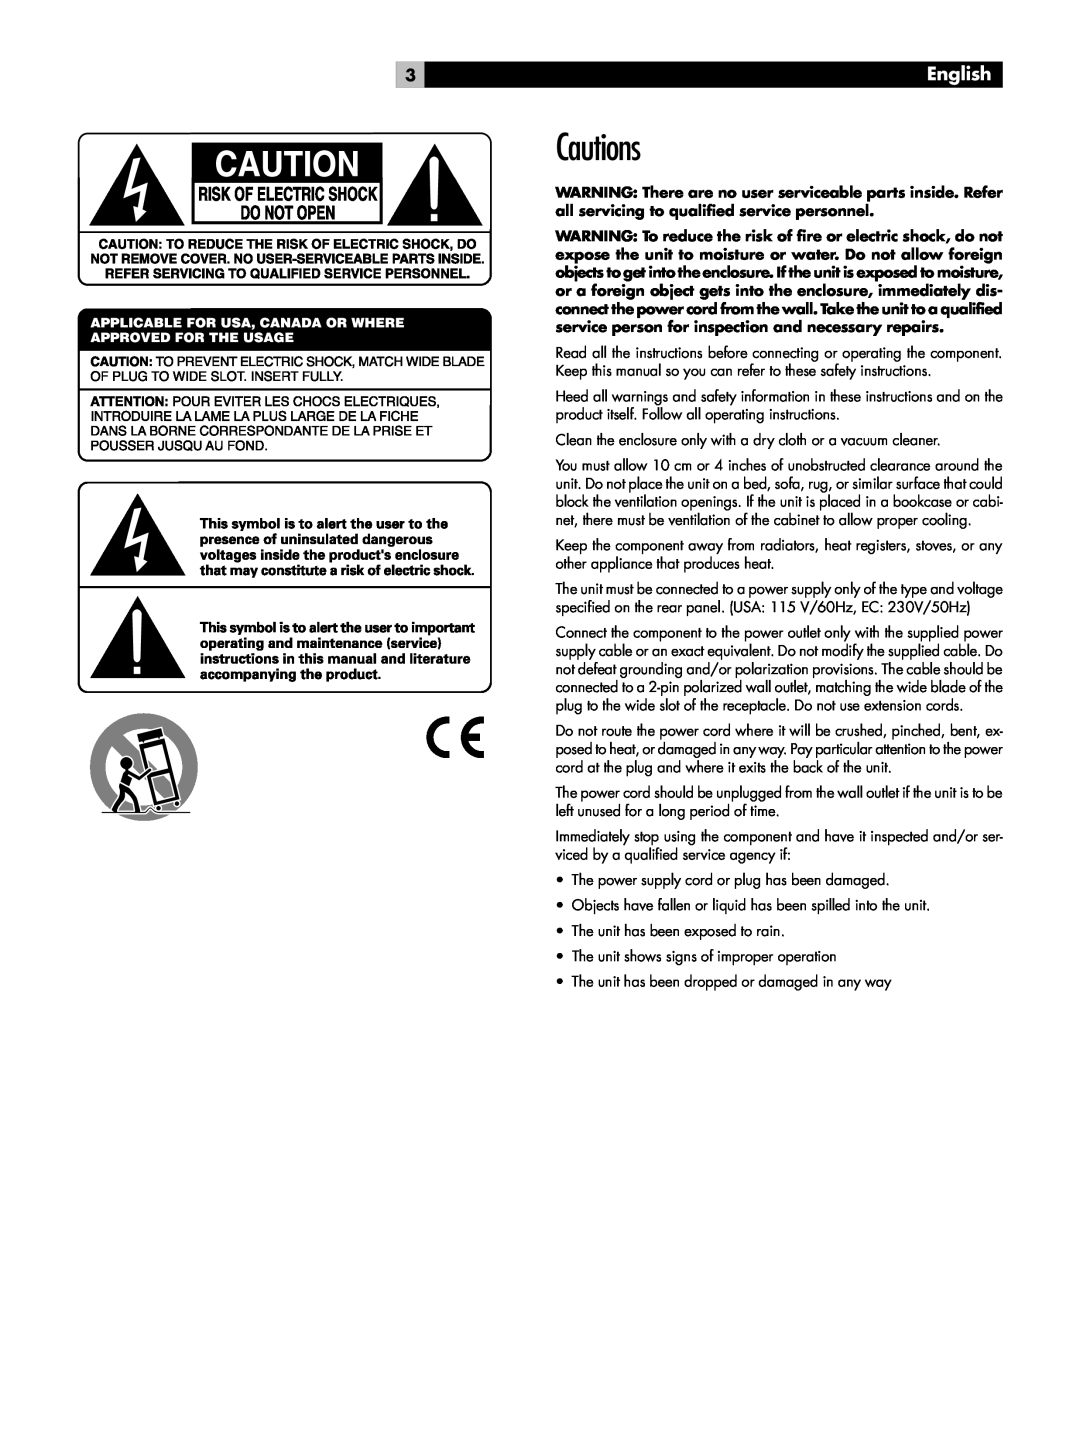 Rotel RC-1070 owner manual Cautions, English 